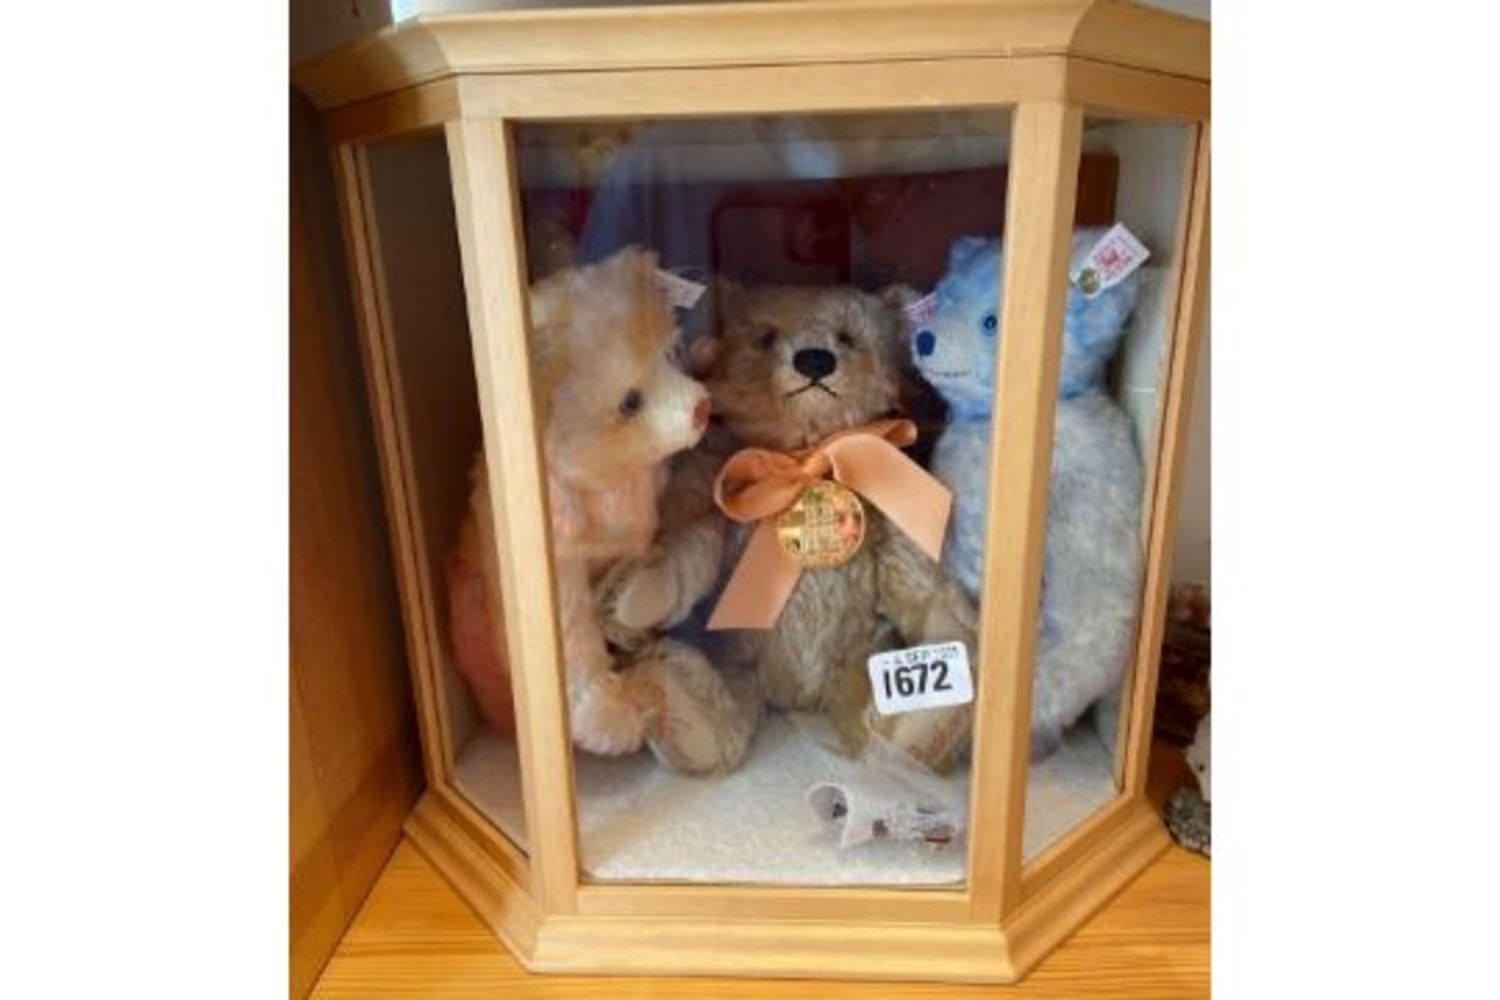 3 DAY SALE - Day 1: Jewellery, Watches & Silver. Day 2:Books, Plate, Stamps & Coins. Day 3: Collectable items & furniture inc. Steiff Bears